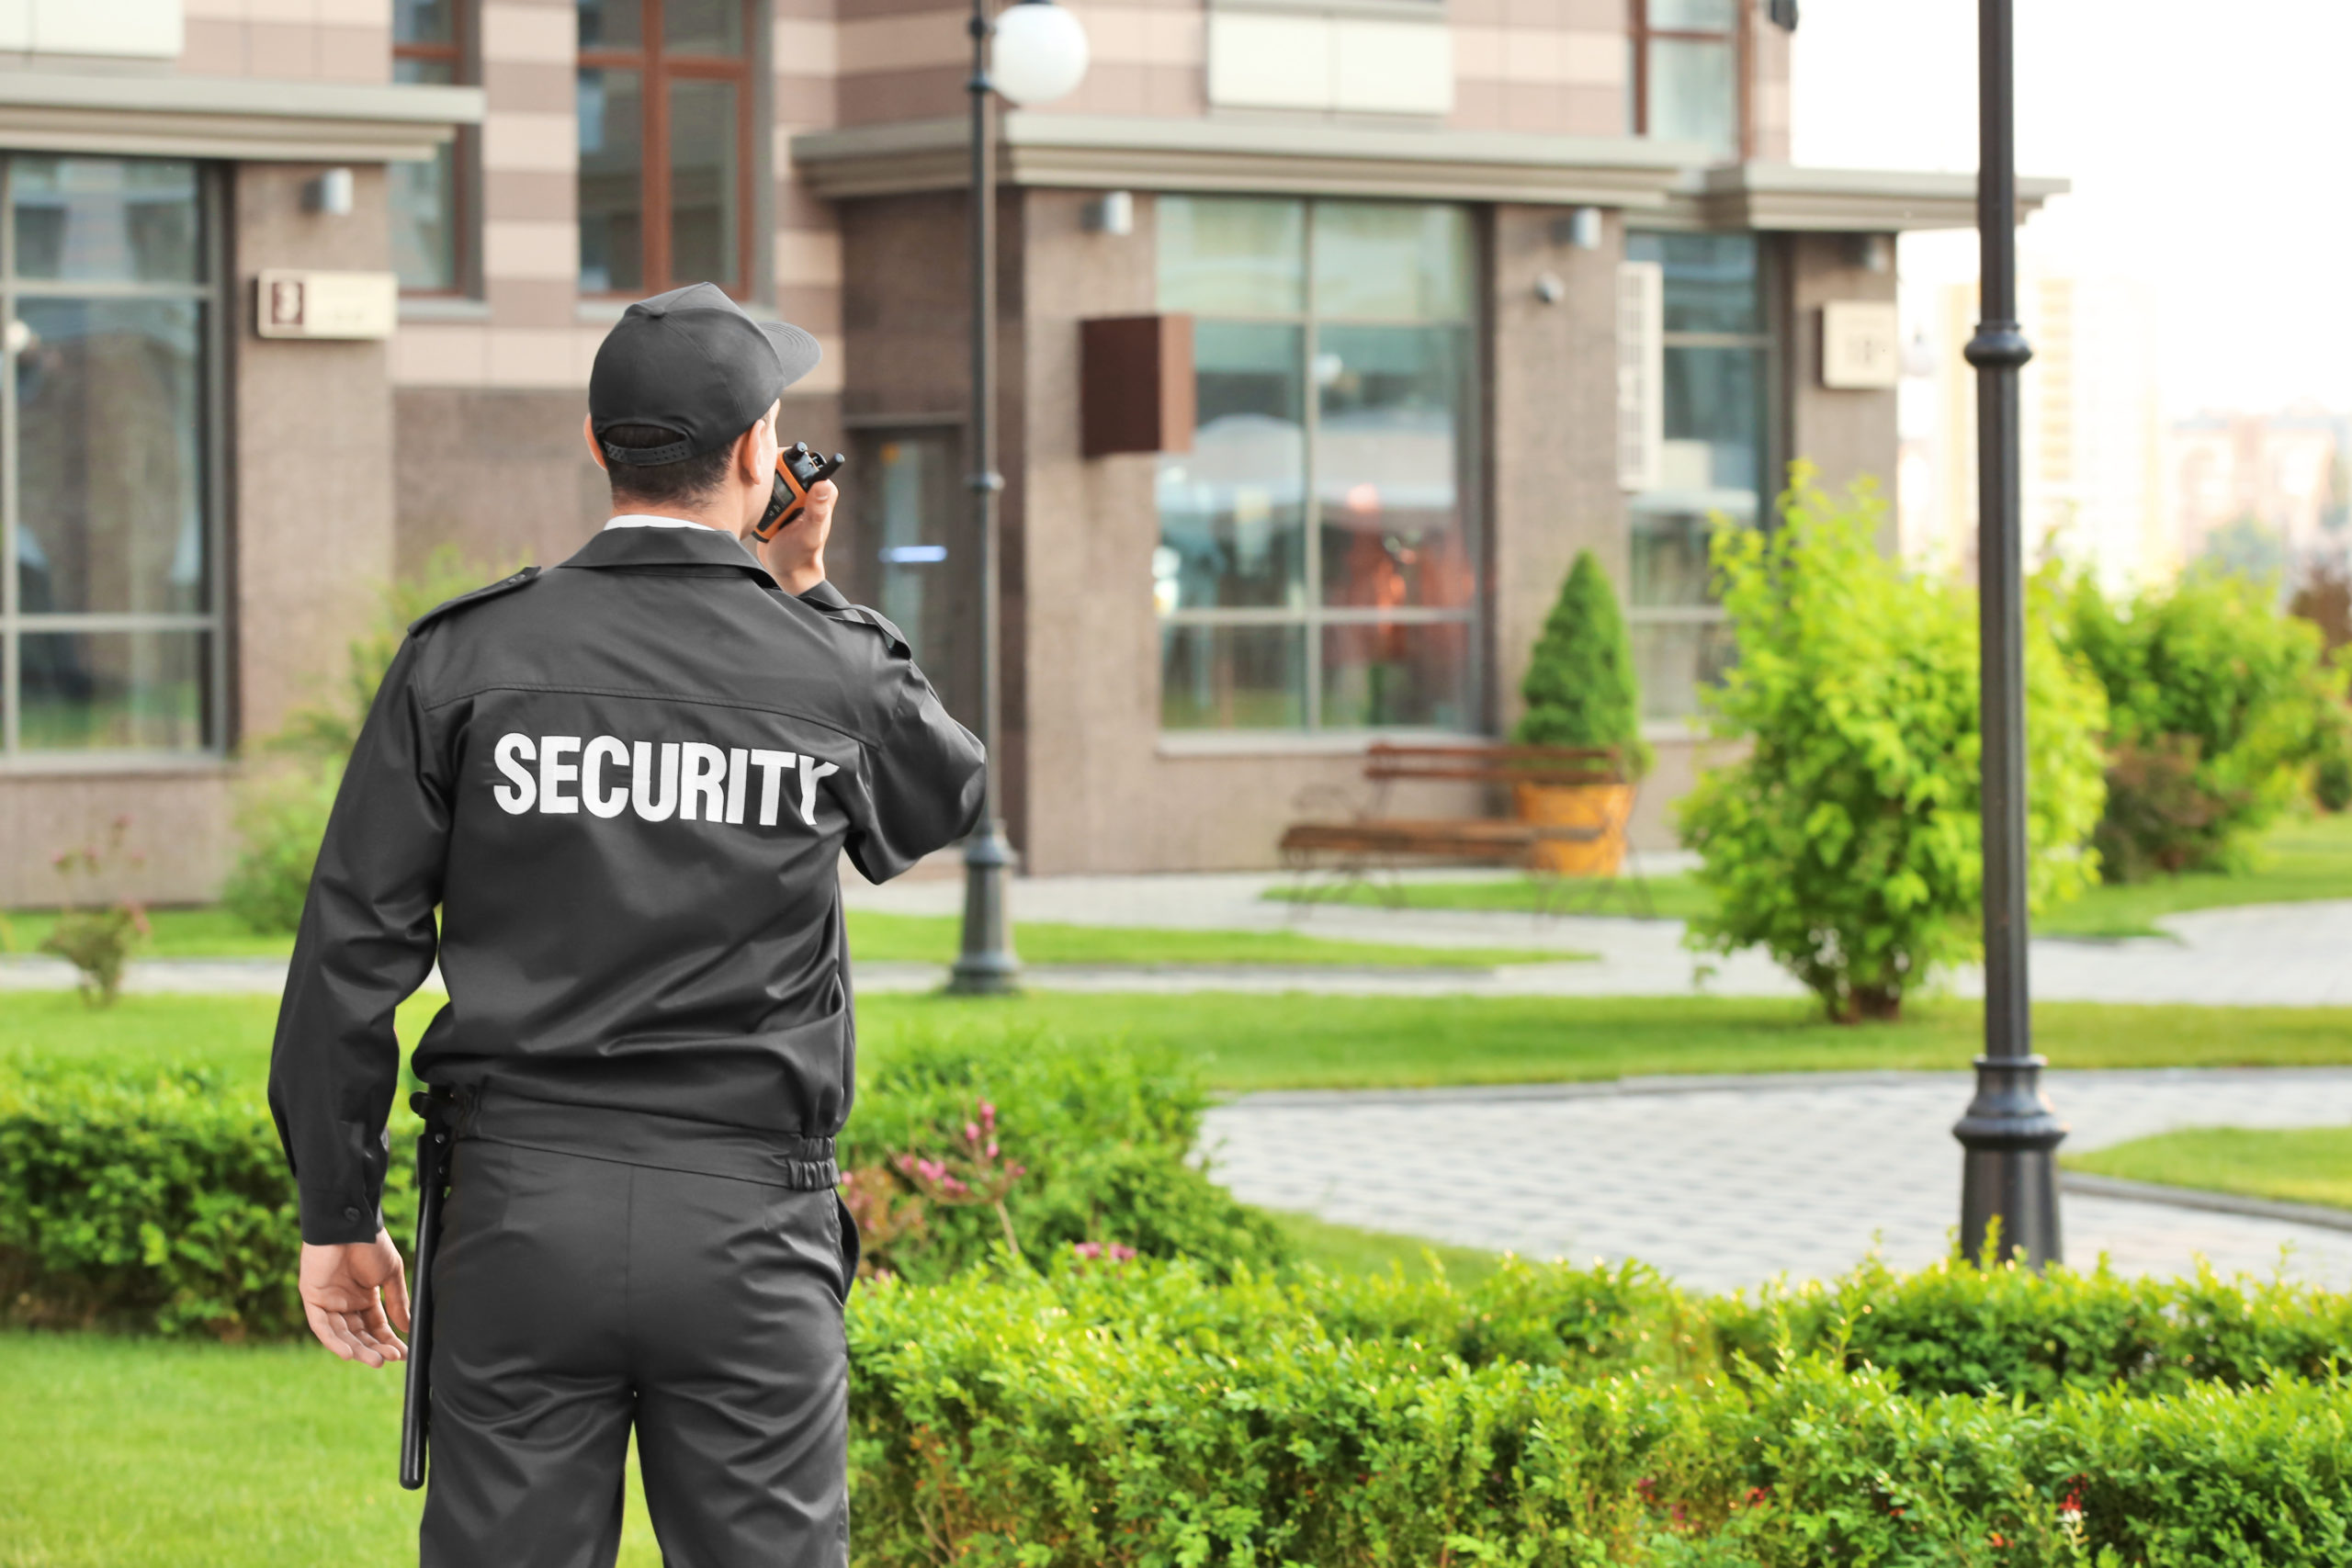 In Florida, property owners can be held responsible if you suffer criminal activity on their premises.